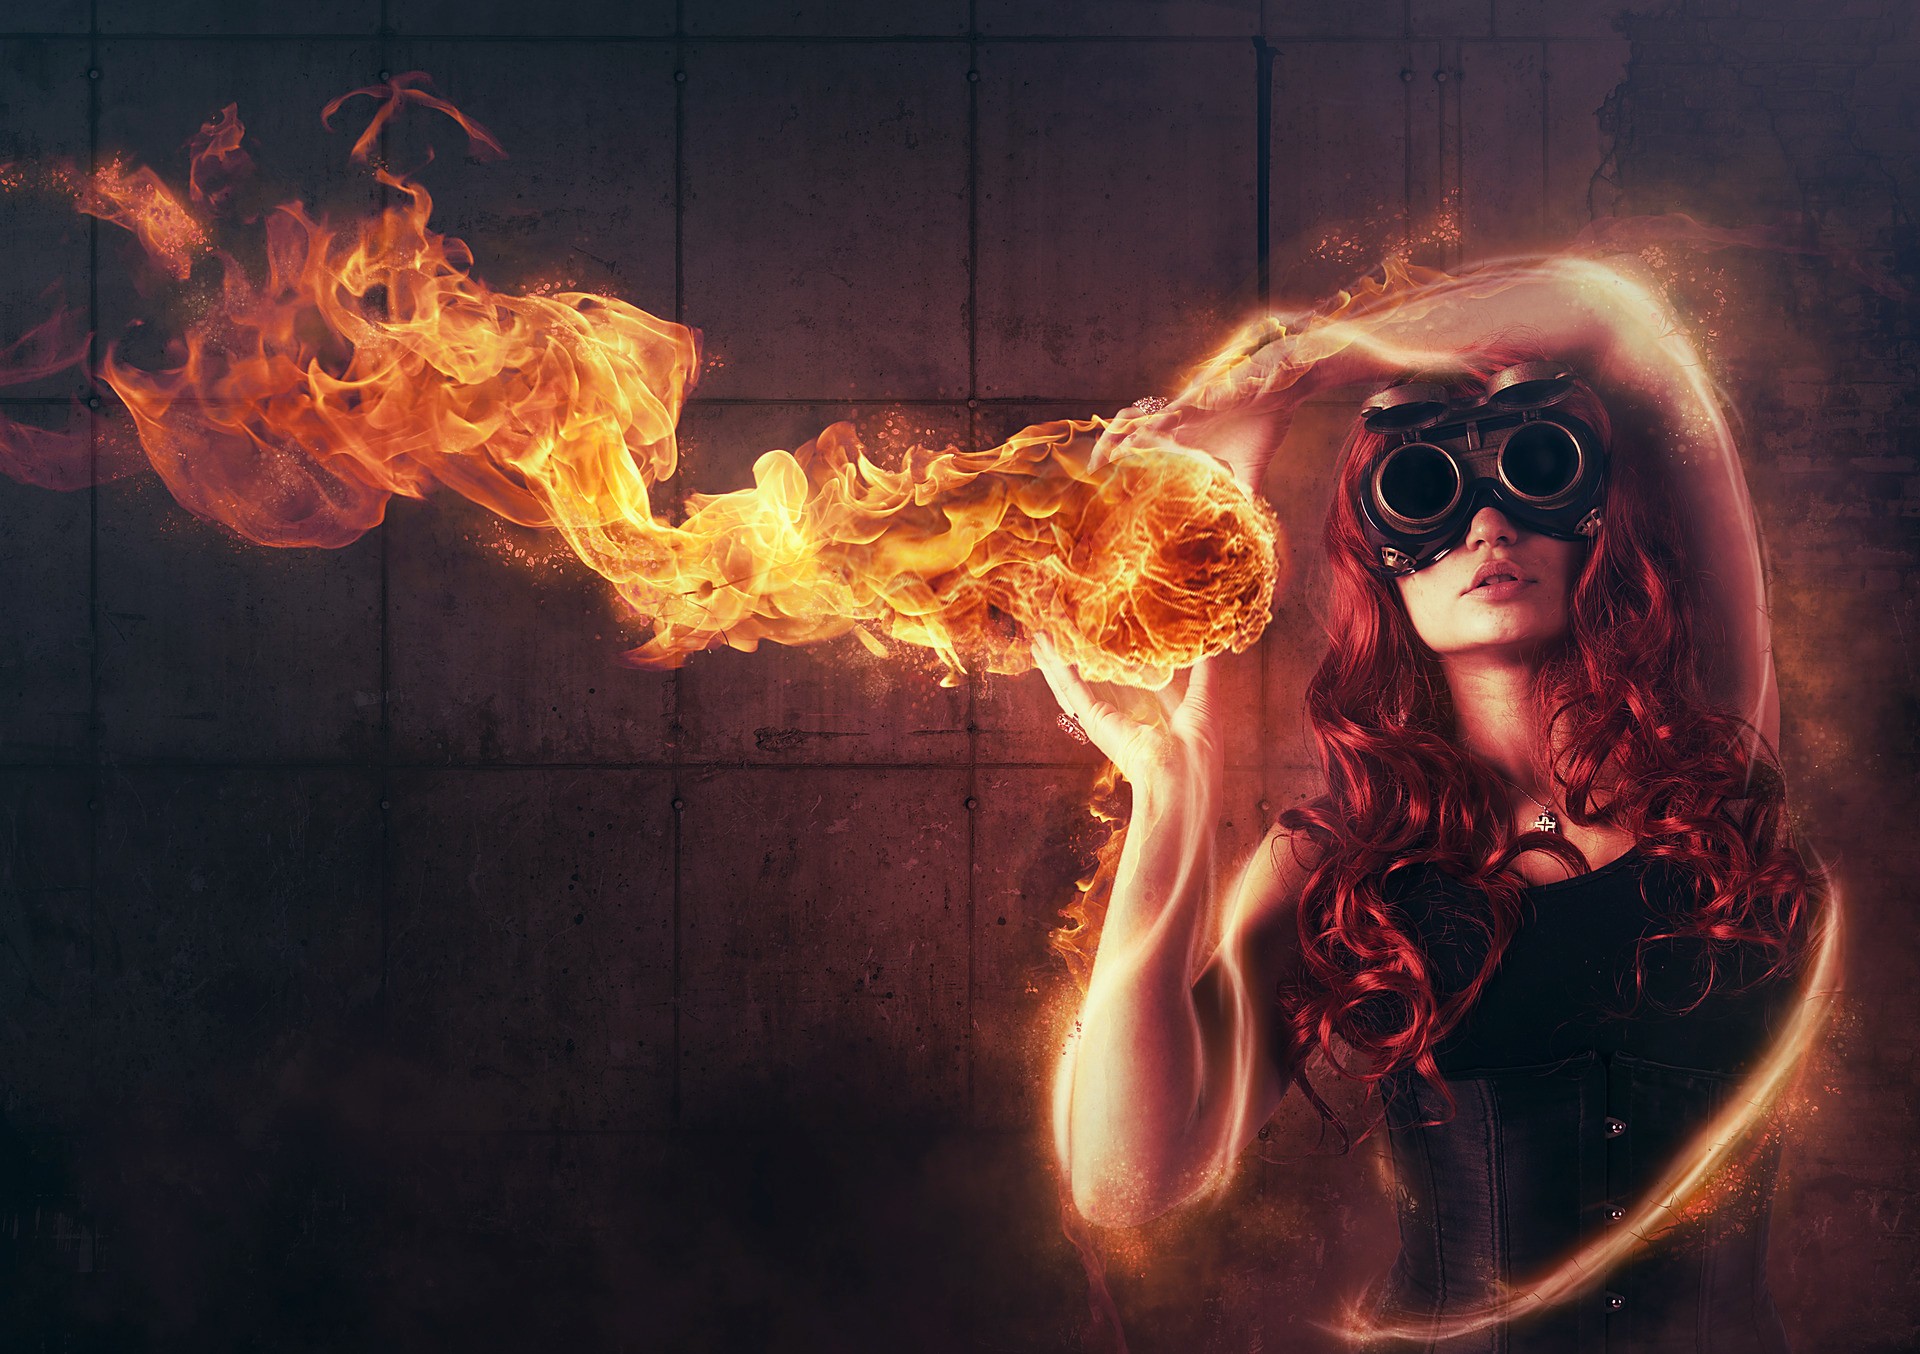 Rendering of a picture of a girl with fire in her hands